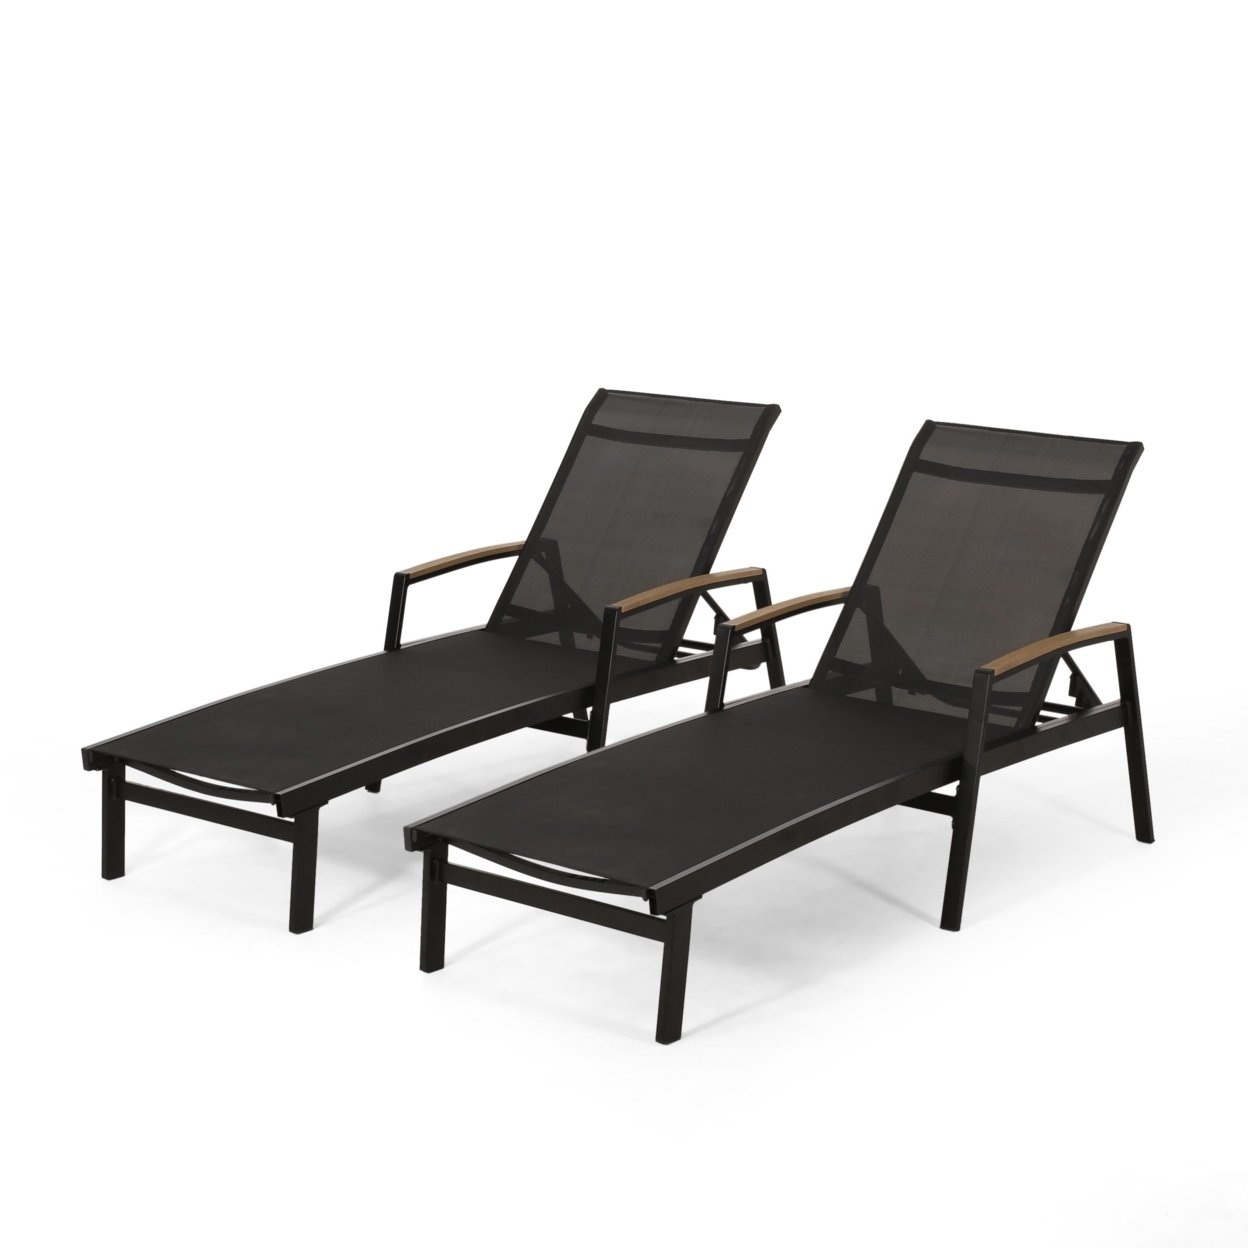 Joy Outdoor Aluminum Chaise Lounge With Mesh Seating (Set Of 2) - White